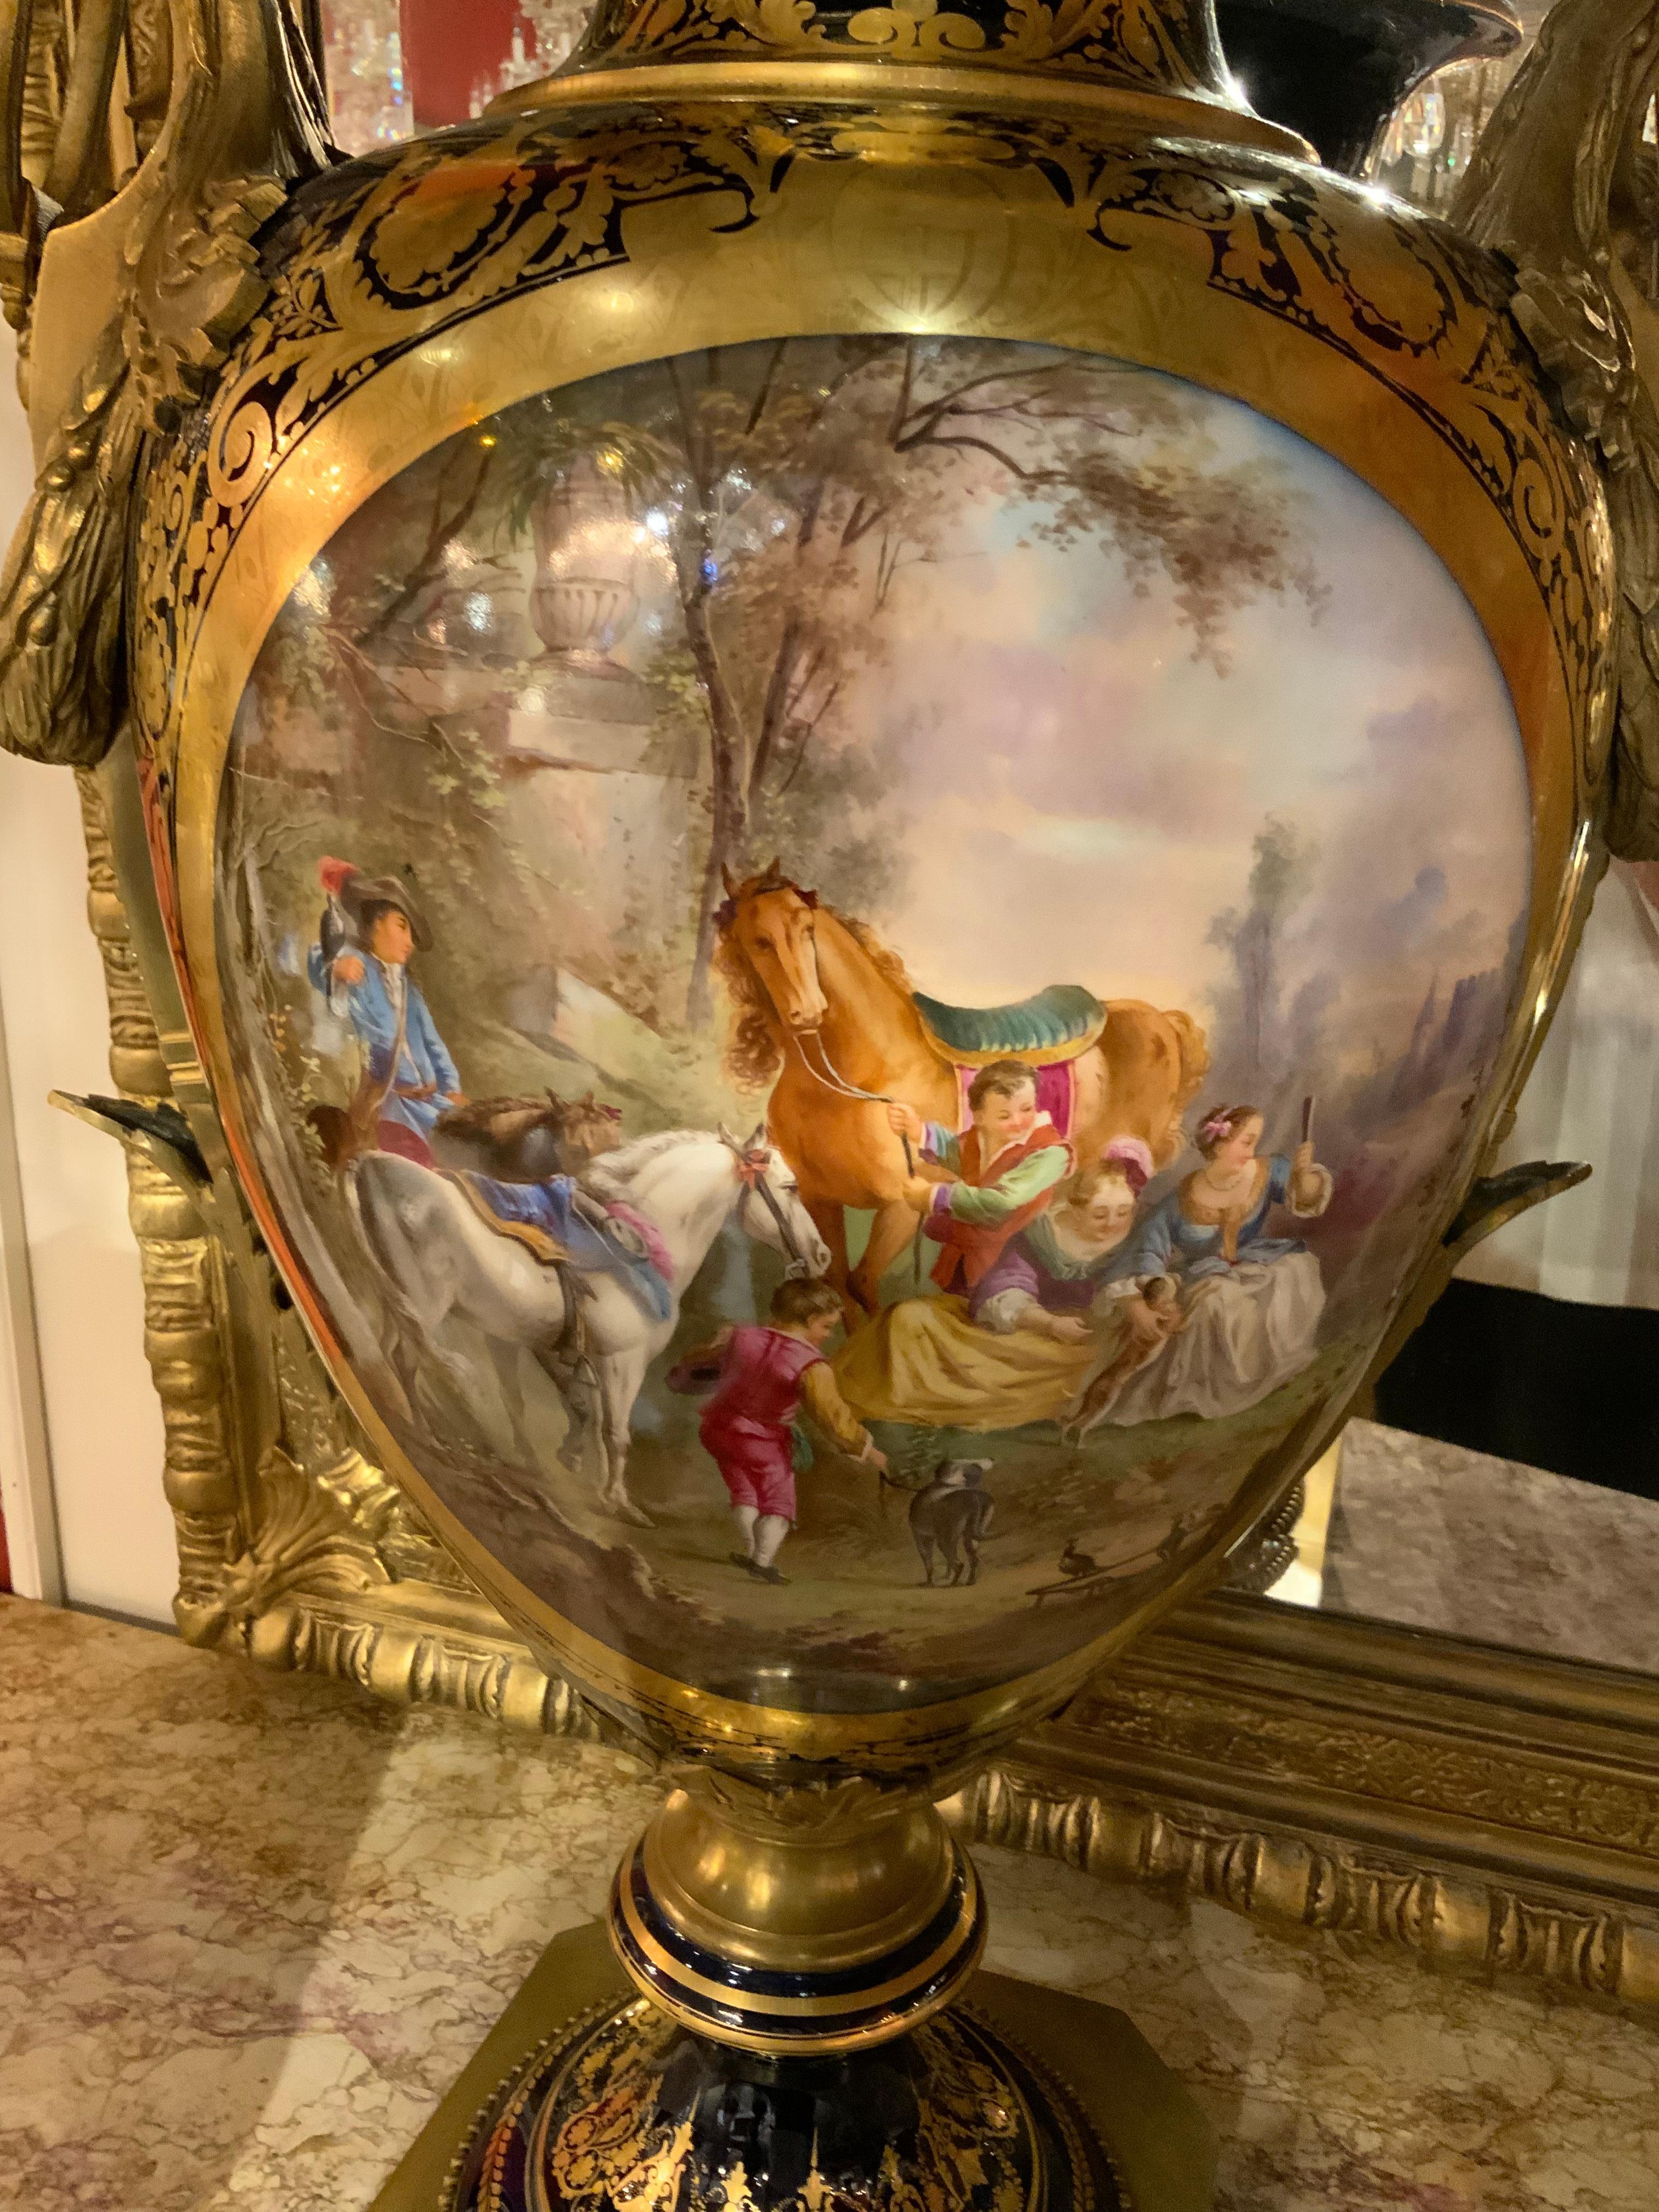 This palace size vase is made of very fine Sevres porcelain 
And has cameos in an oval shape that depict a classical
Scene on one side and a landscape on the verso. The ground
Hue is a deep cobalt hue and the mounts are well cast ornate
Bronze